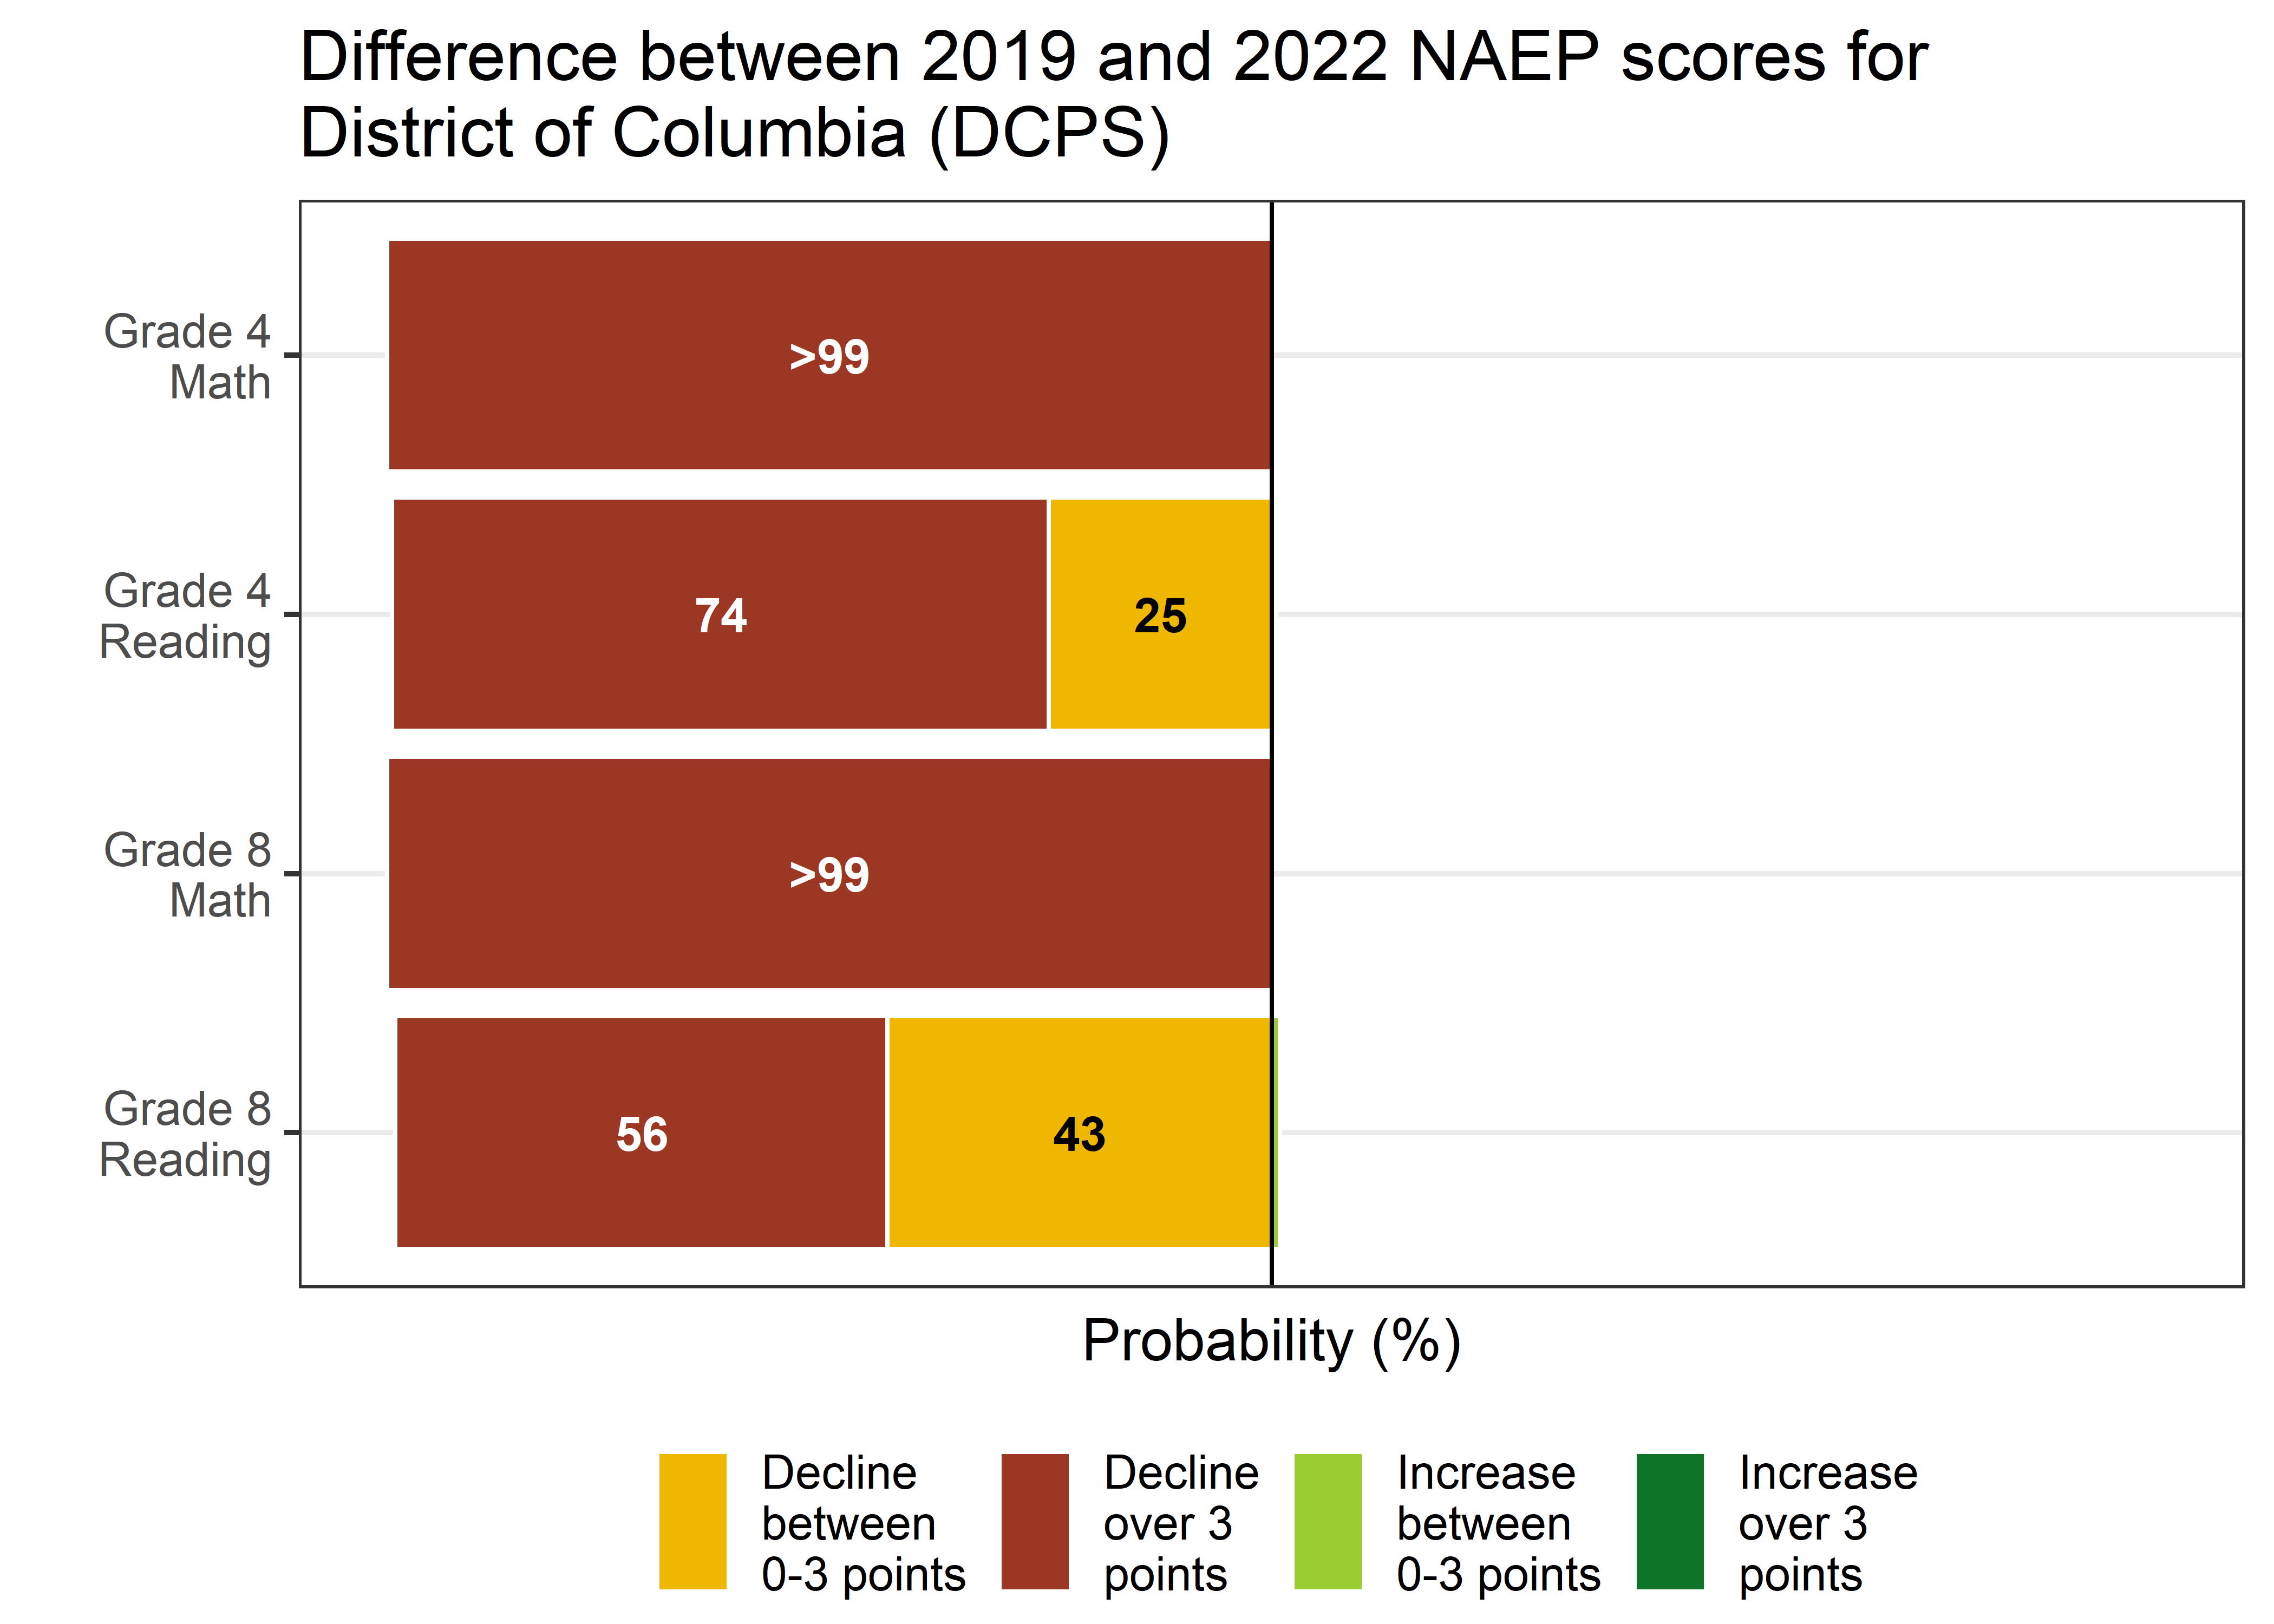 Figure: Difference between 2019 and 2022 NAEP scores for District of Columbia (DCPS)